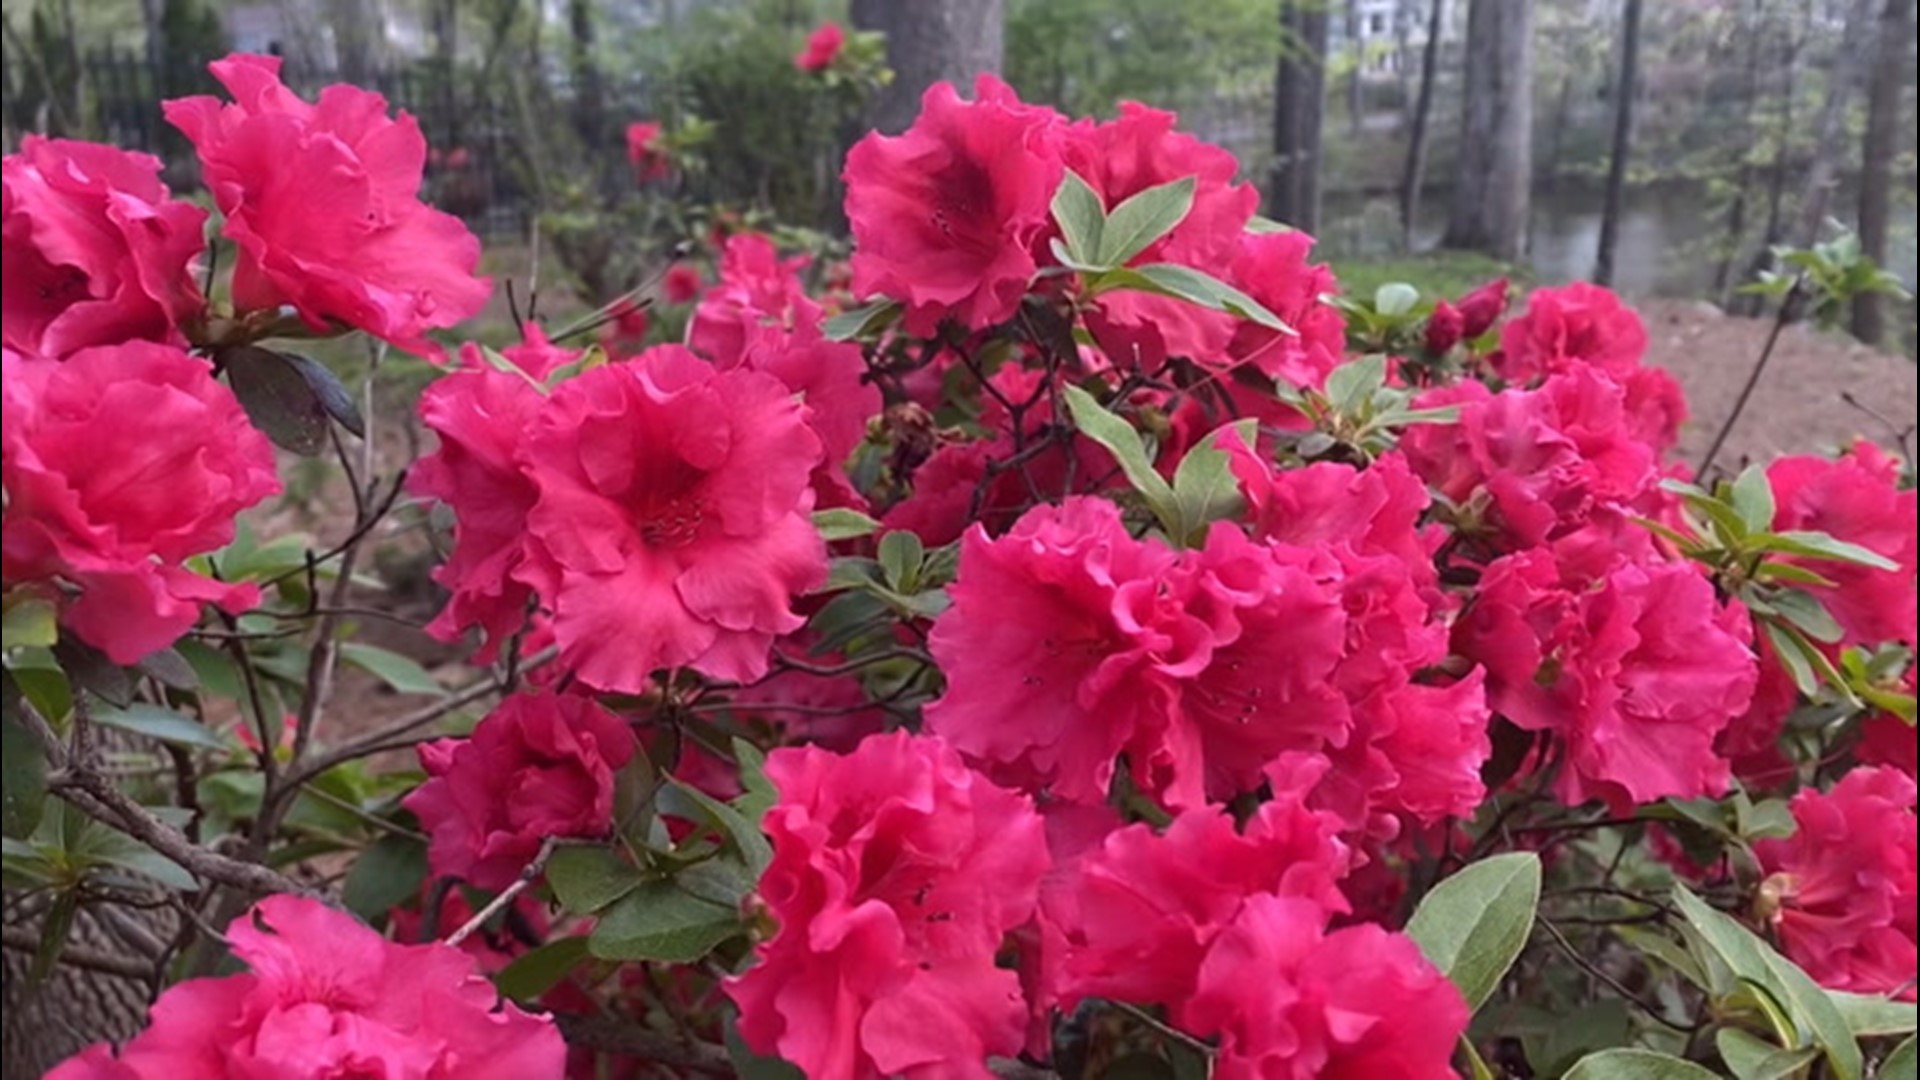 The flowers can be impacted by temperature, and if it warms up in Georgia, experts say they'll last only a few more weeks.